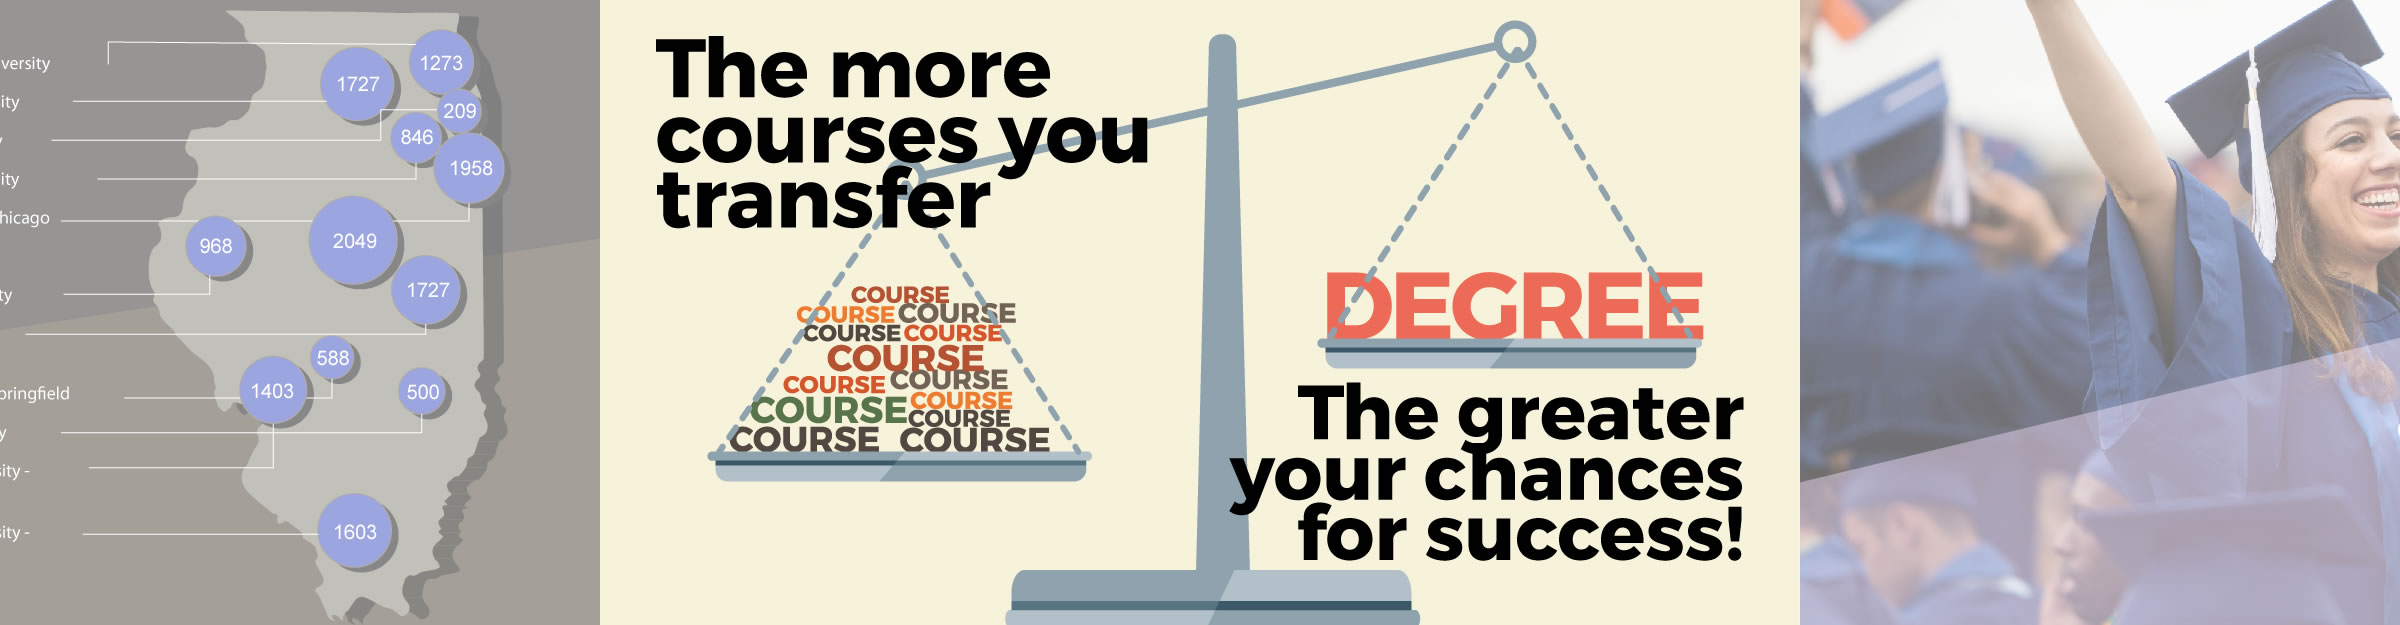 The more courses you transfer, the greater your chances for success